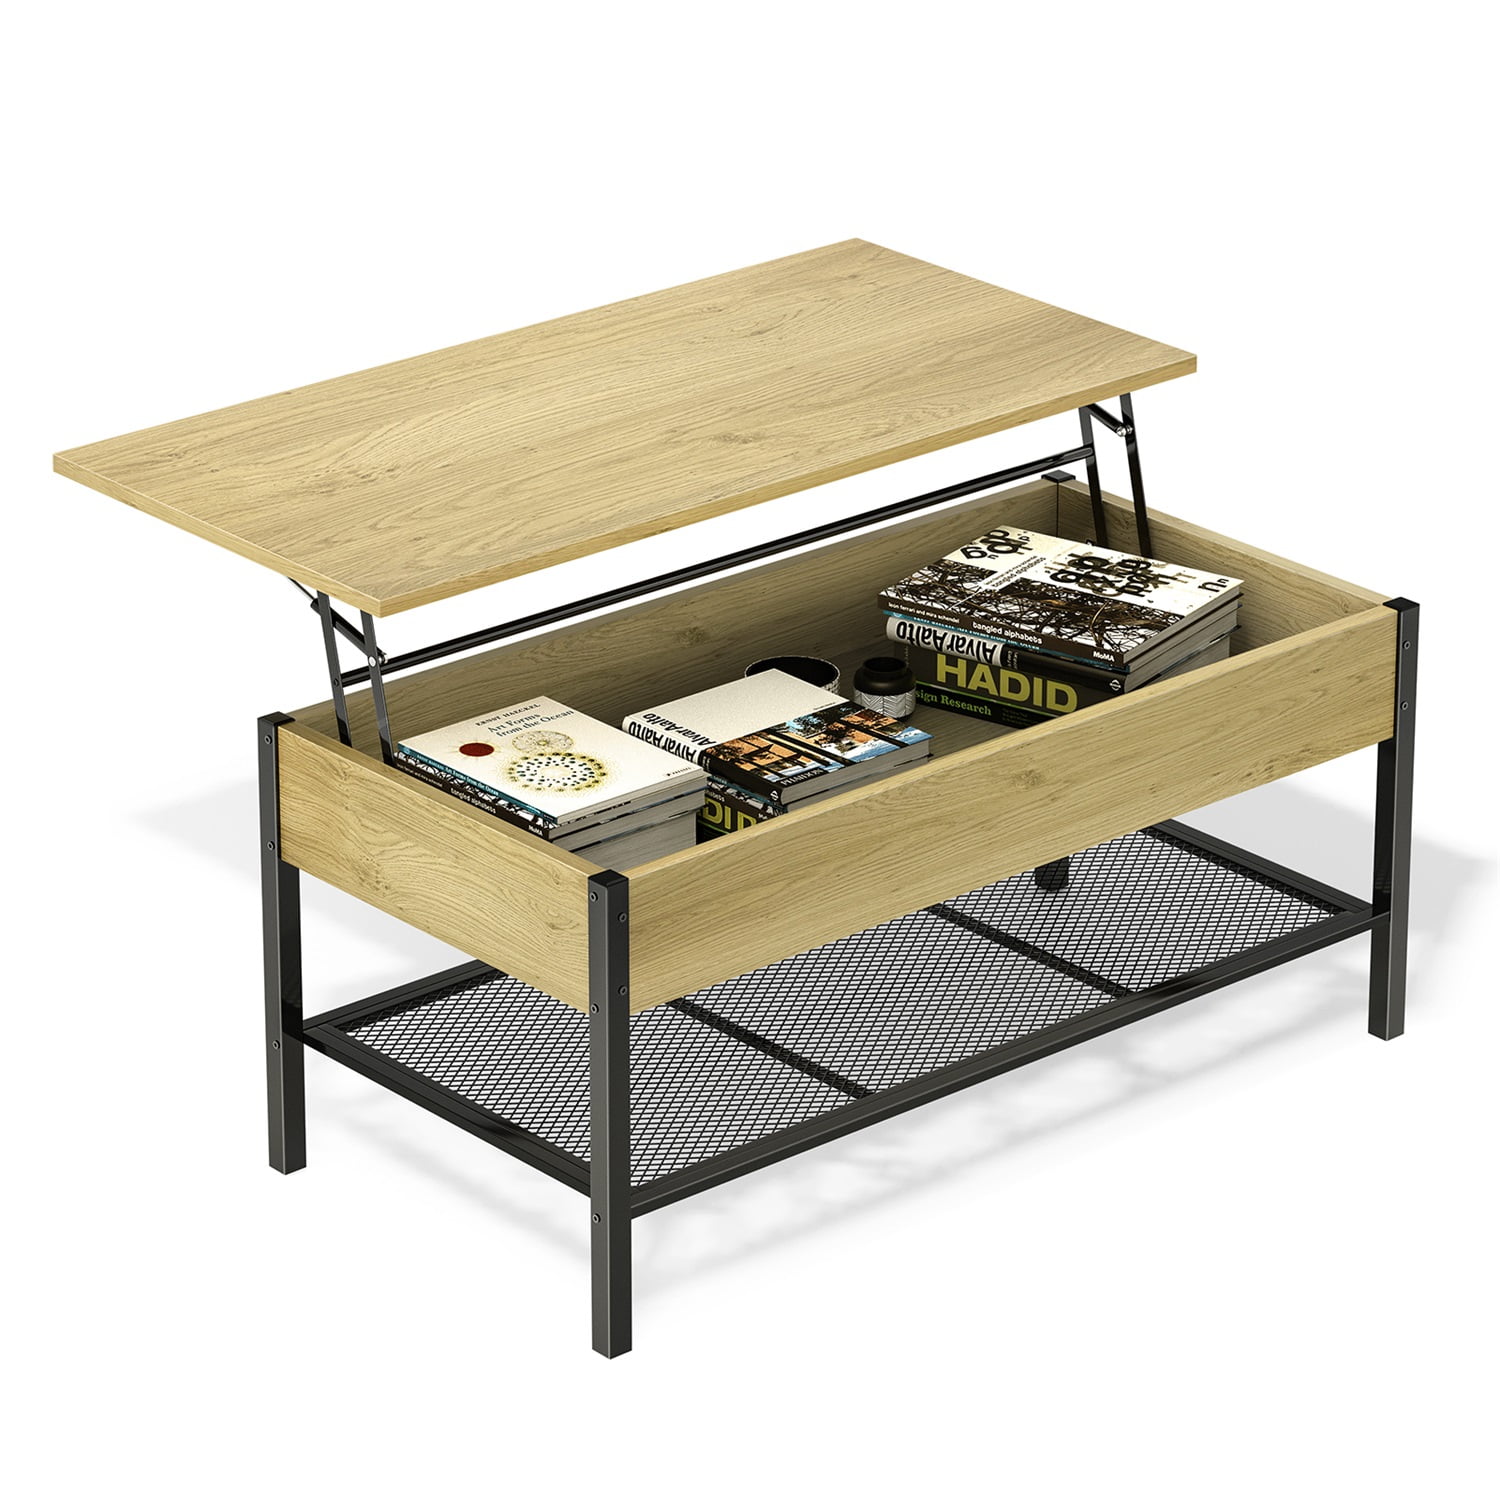 Canddidliike Lift Top Coffee Table with Hidden Compartment & Open Shelf, Lift Tabletop Dining Table for Living Room - Black